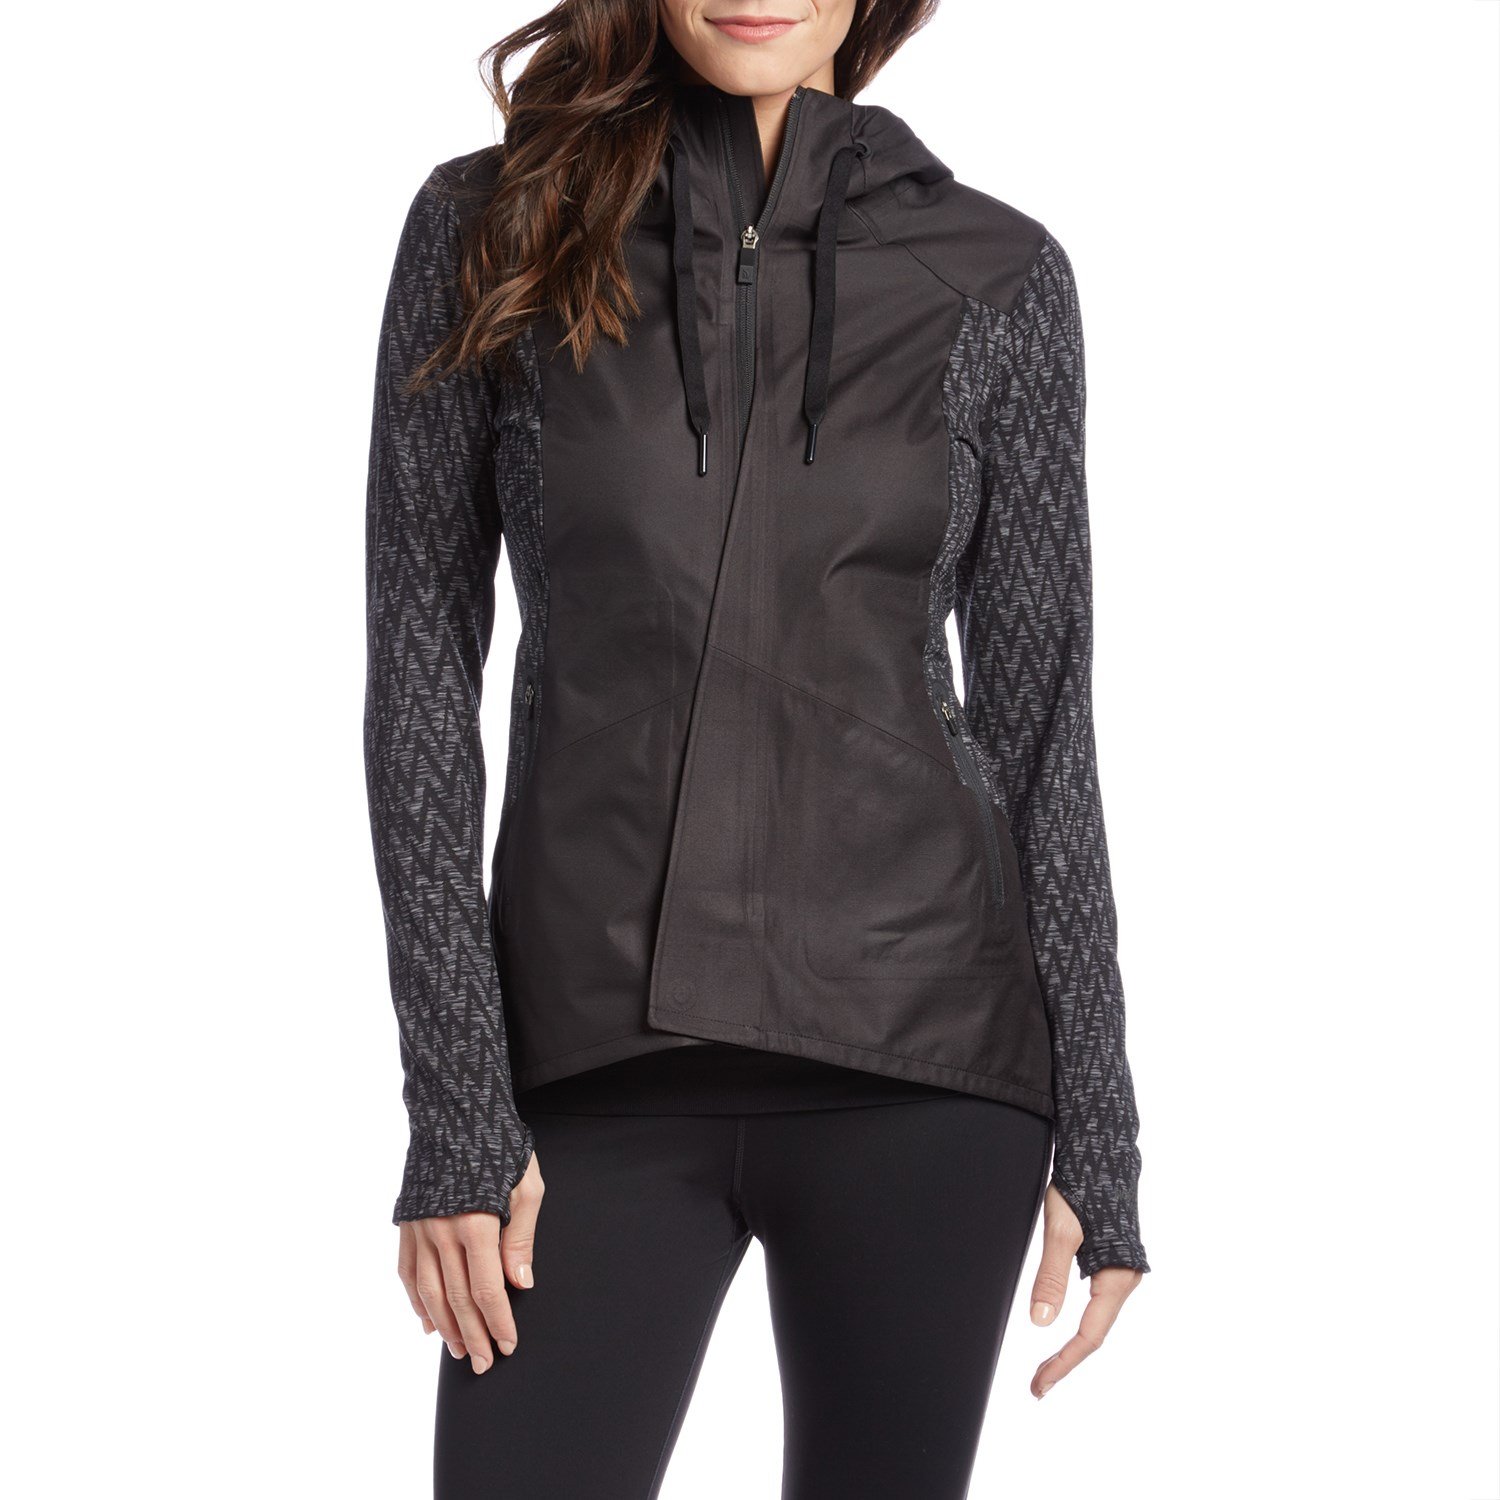 north face women's slim fit jacket